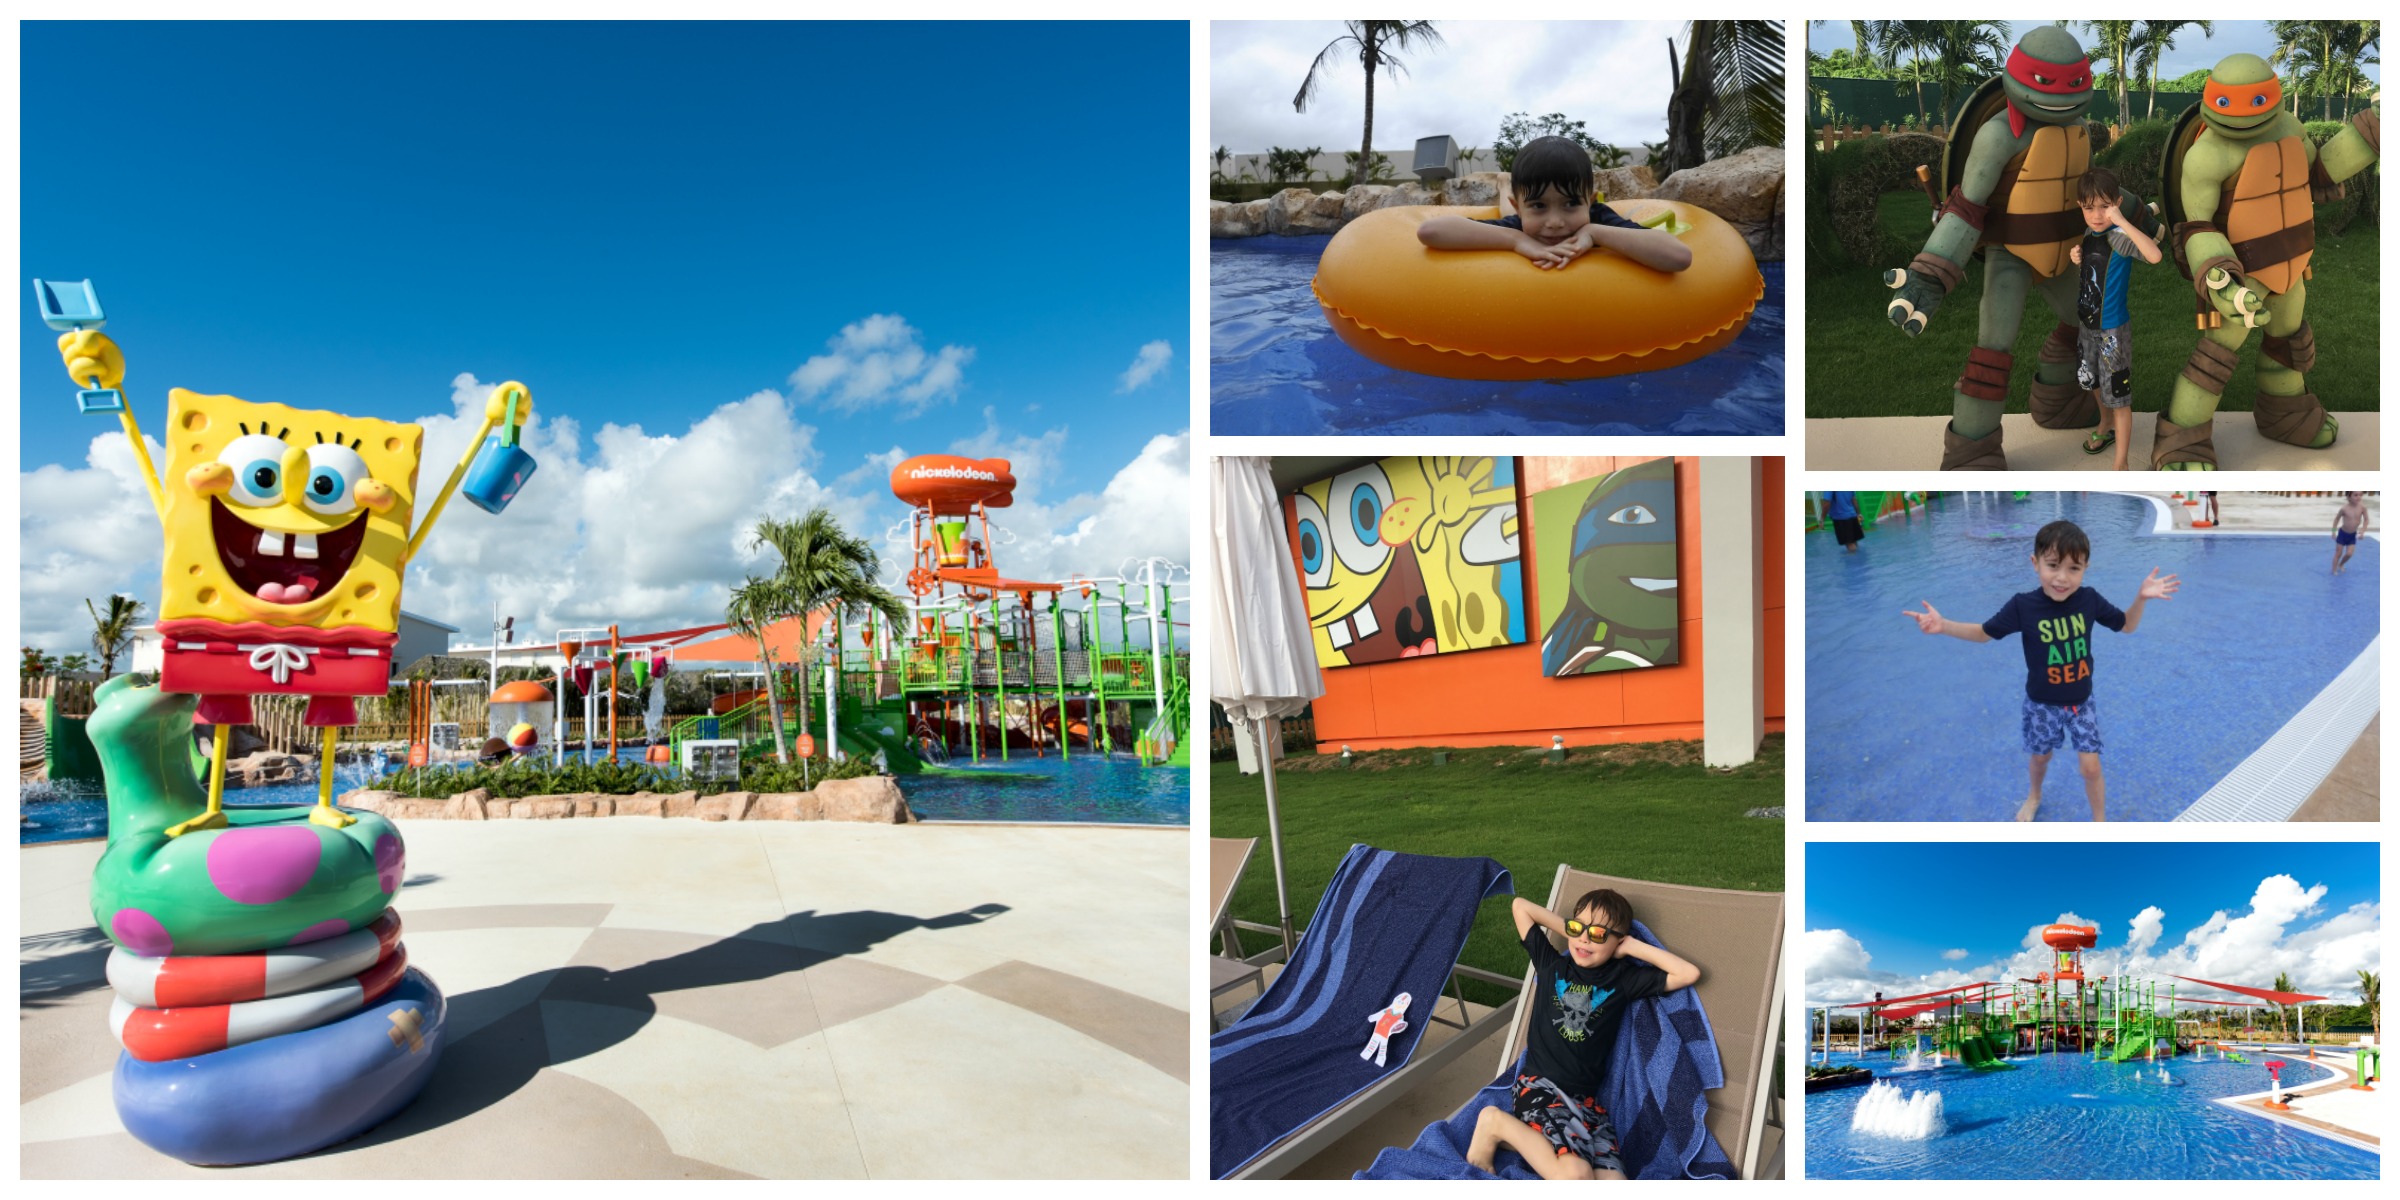 All-Inclusive Luxury Family Vacation at Nickelodeon Resort Punta Cana: Resort Review